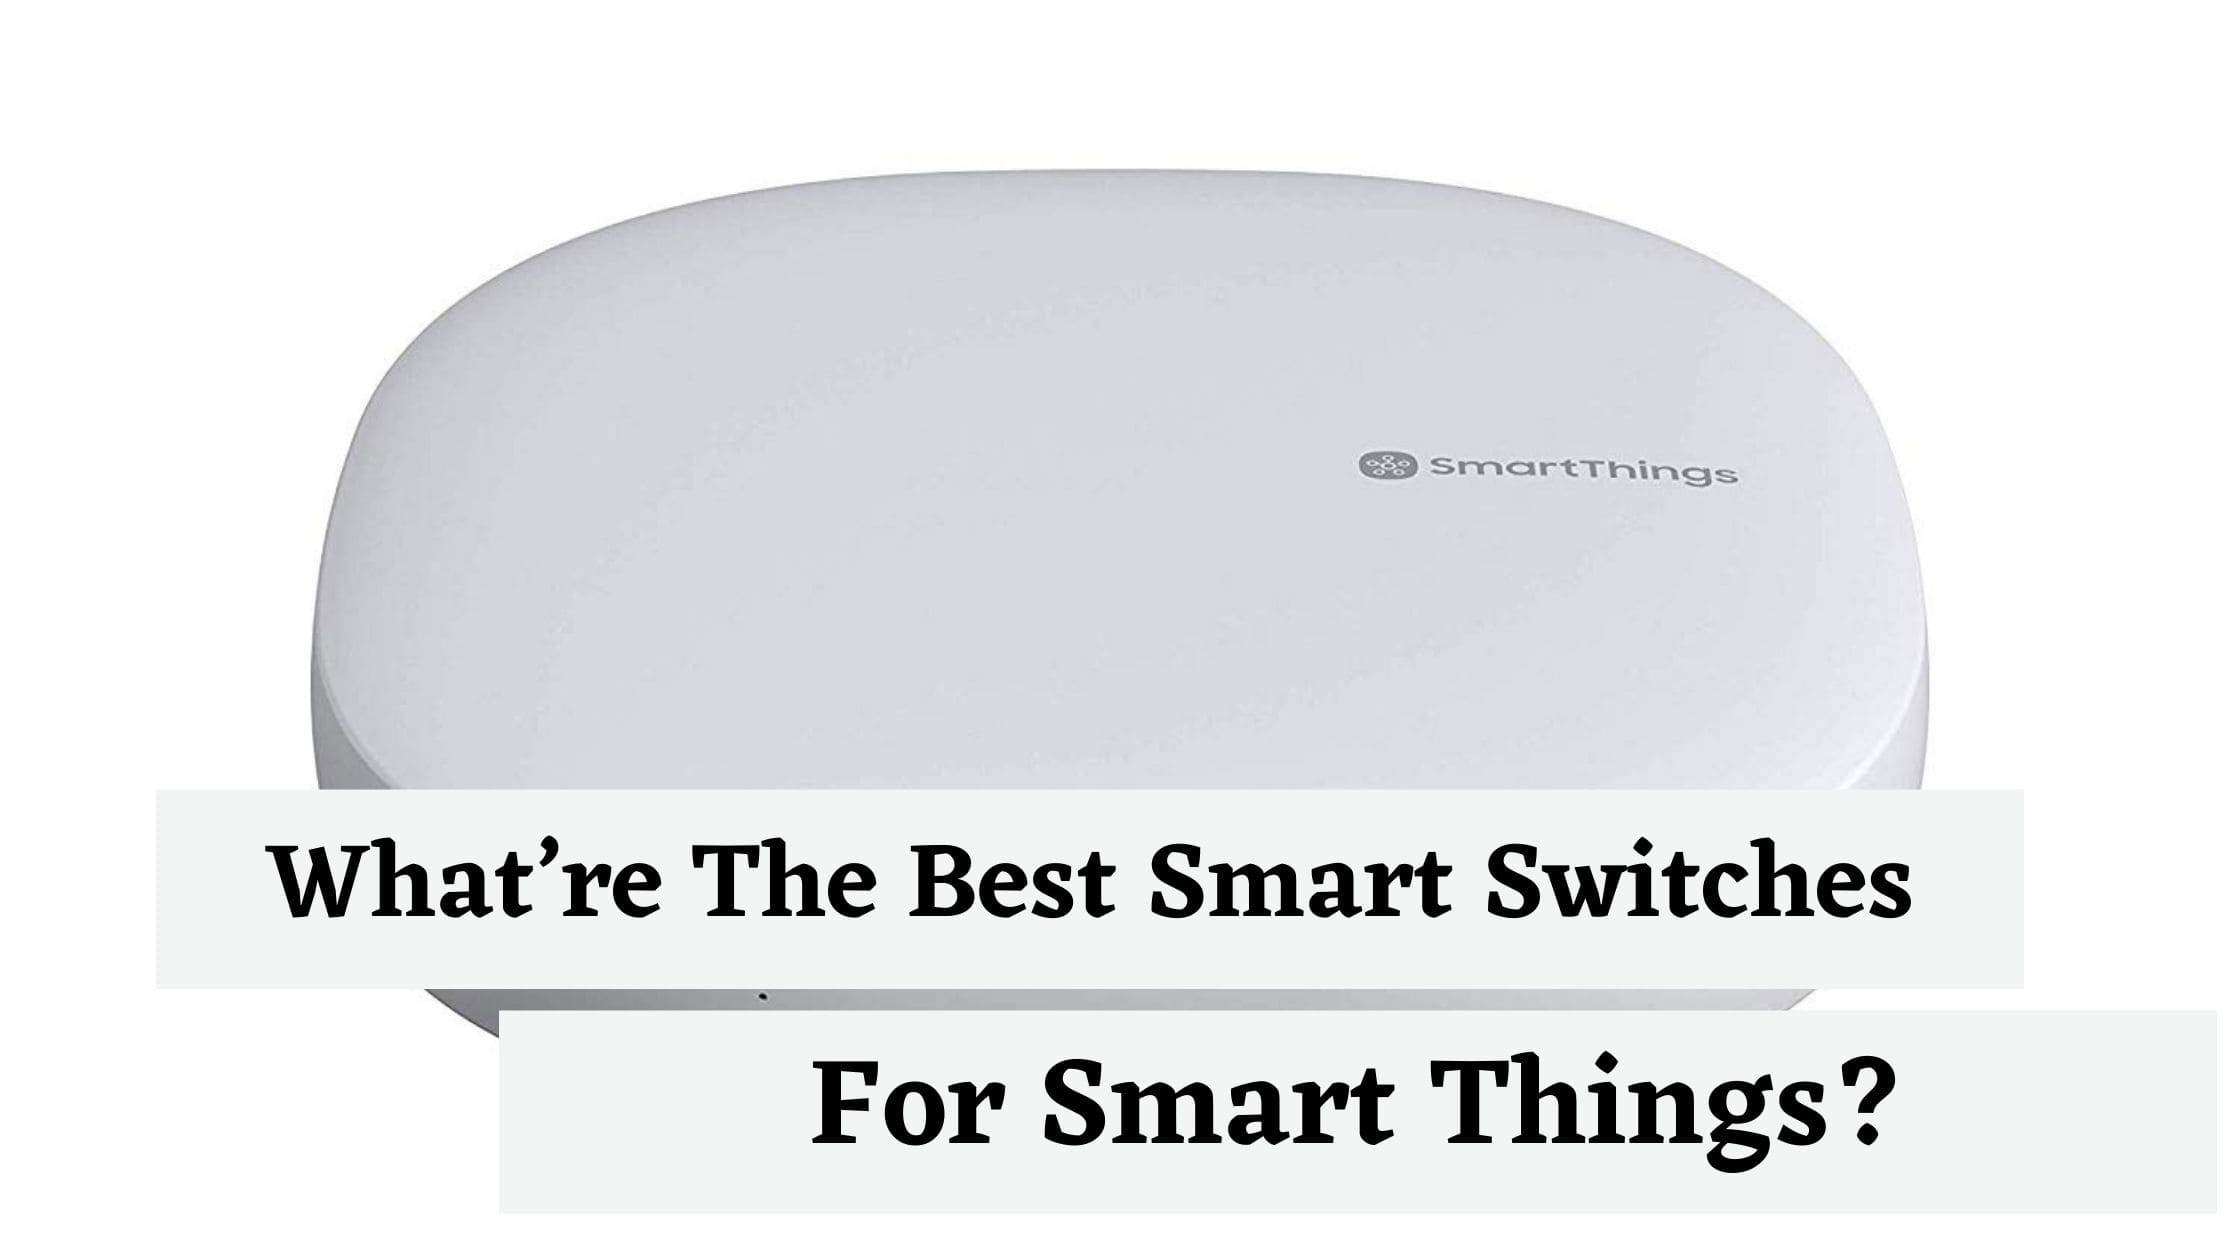 What’re The Best Smart Switches For Smart Things?